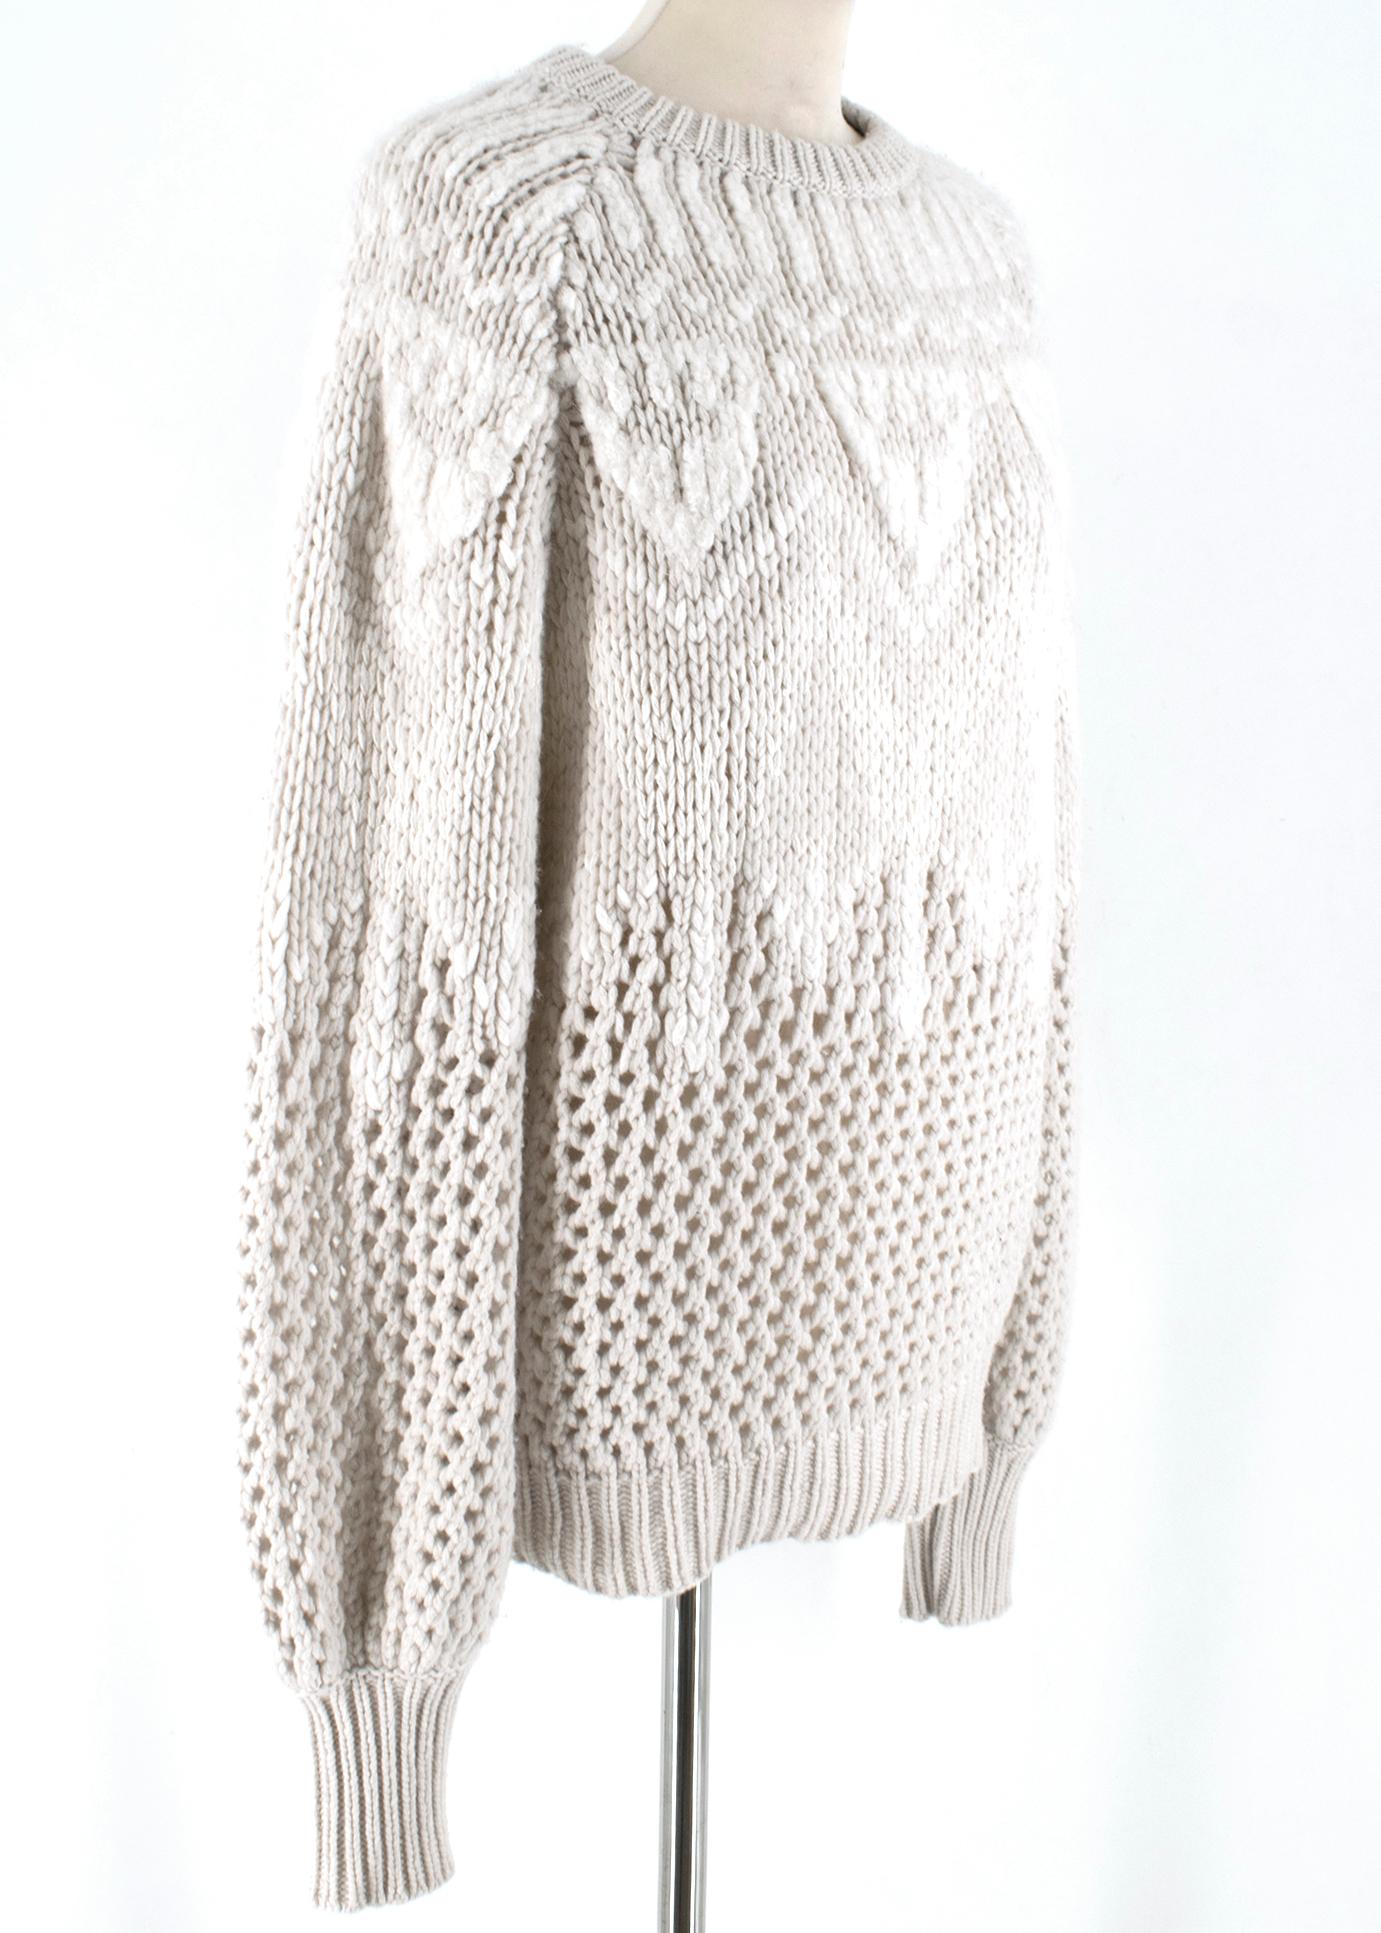 Brunello Cucinelli beige cashmere knitted sweater. Cable knitted with patterns. Remains in excellent condition. 

L 62cm

W 46cm 

M